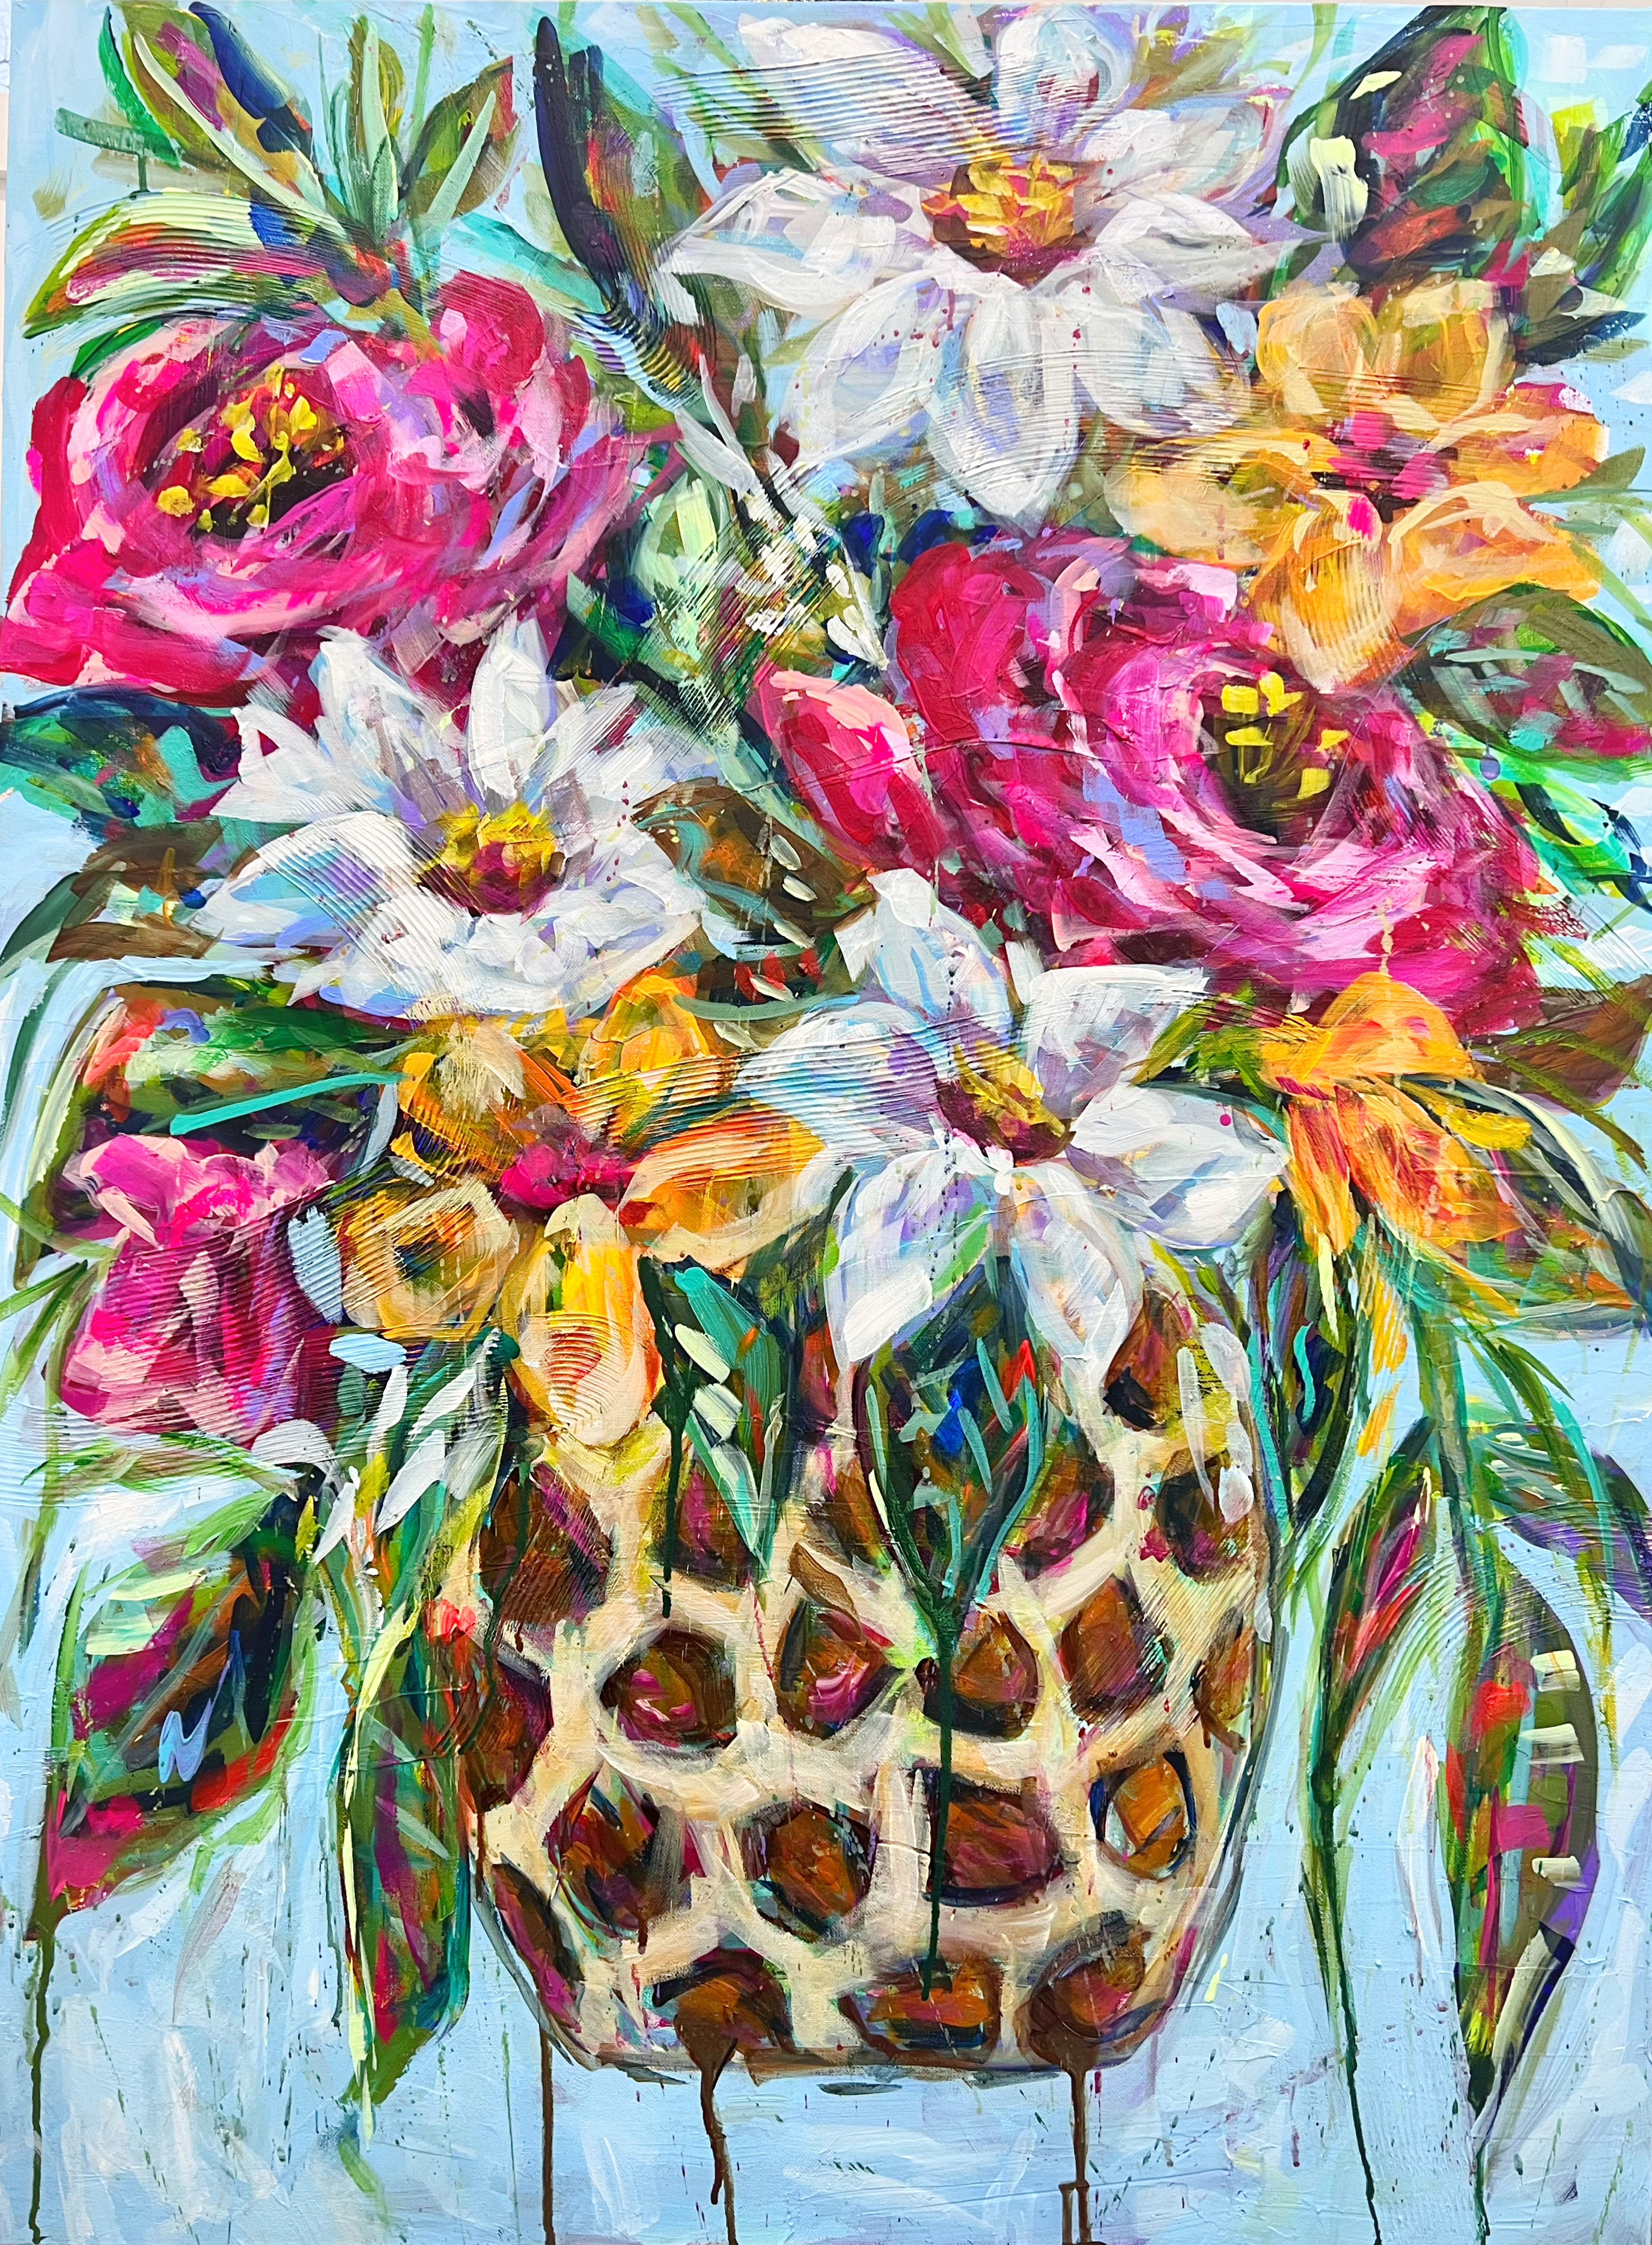 Roses and Daisies in Leopard Vase 30"x40" Original Painting on Canvas